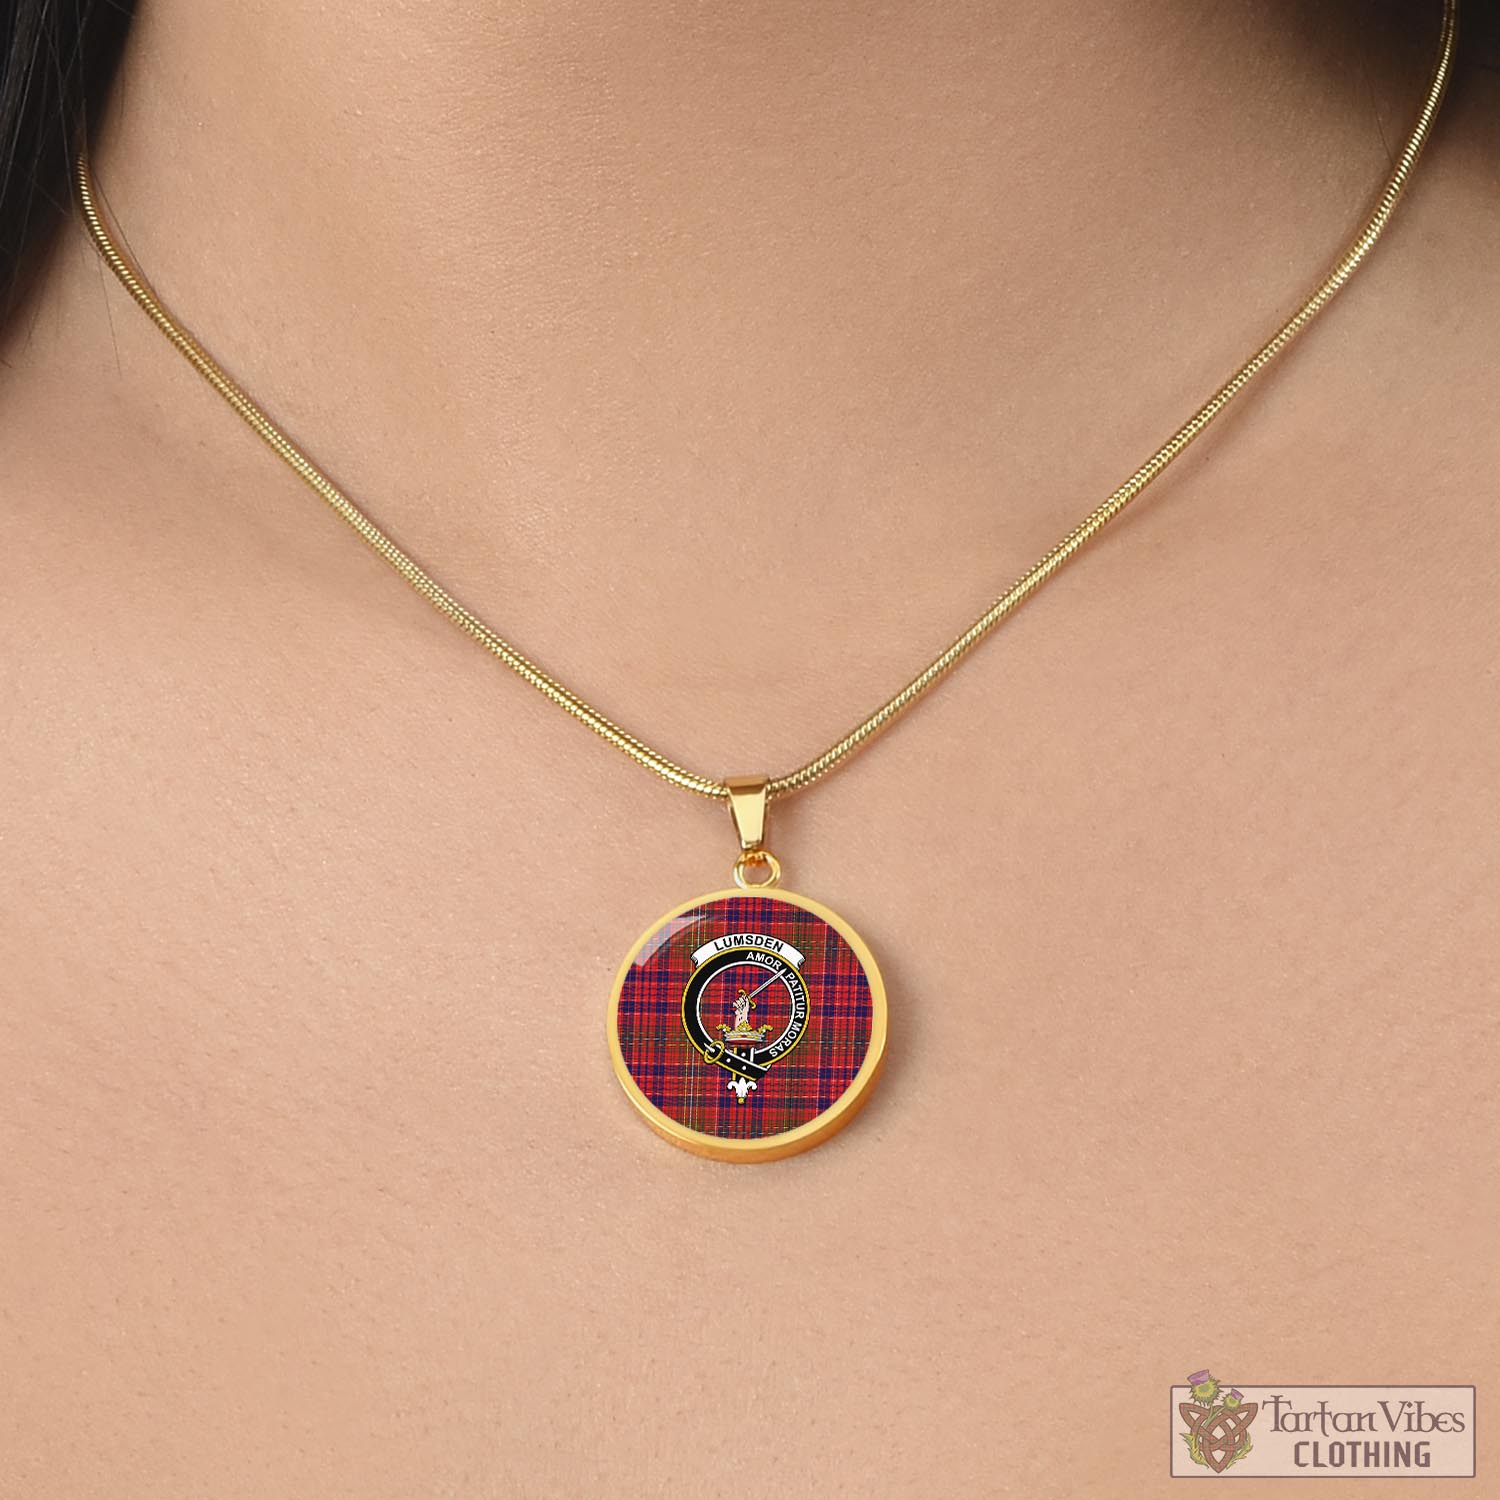 Tartan Vibes Clothing Lumsden Modern Tartan Circle Necklace with Family Crest